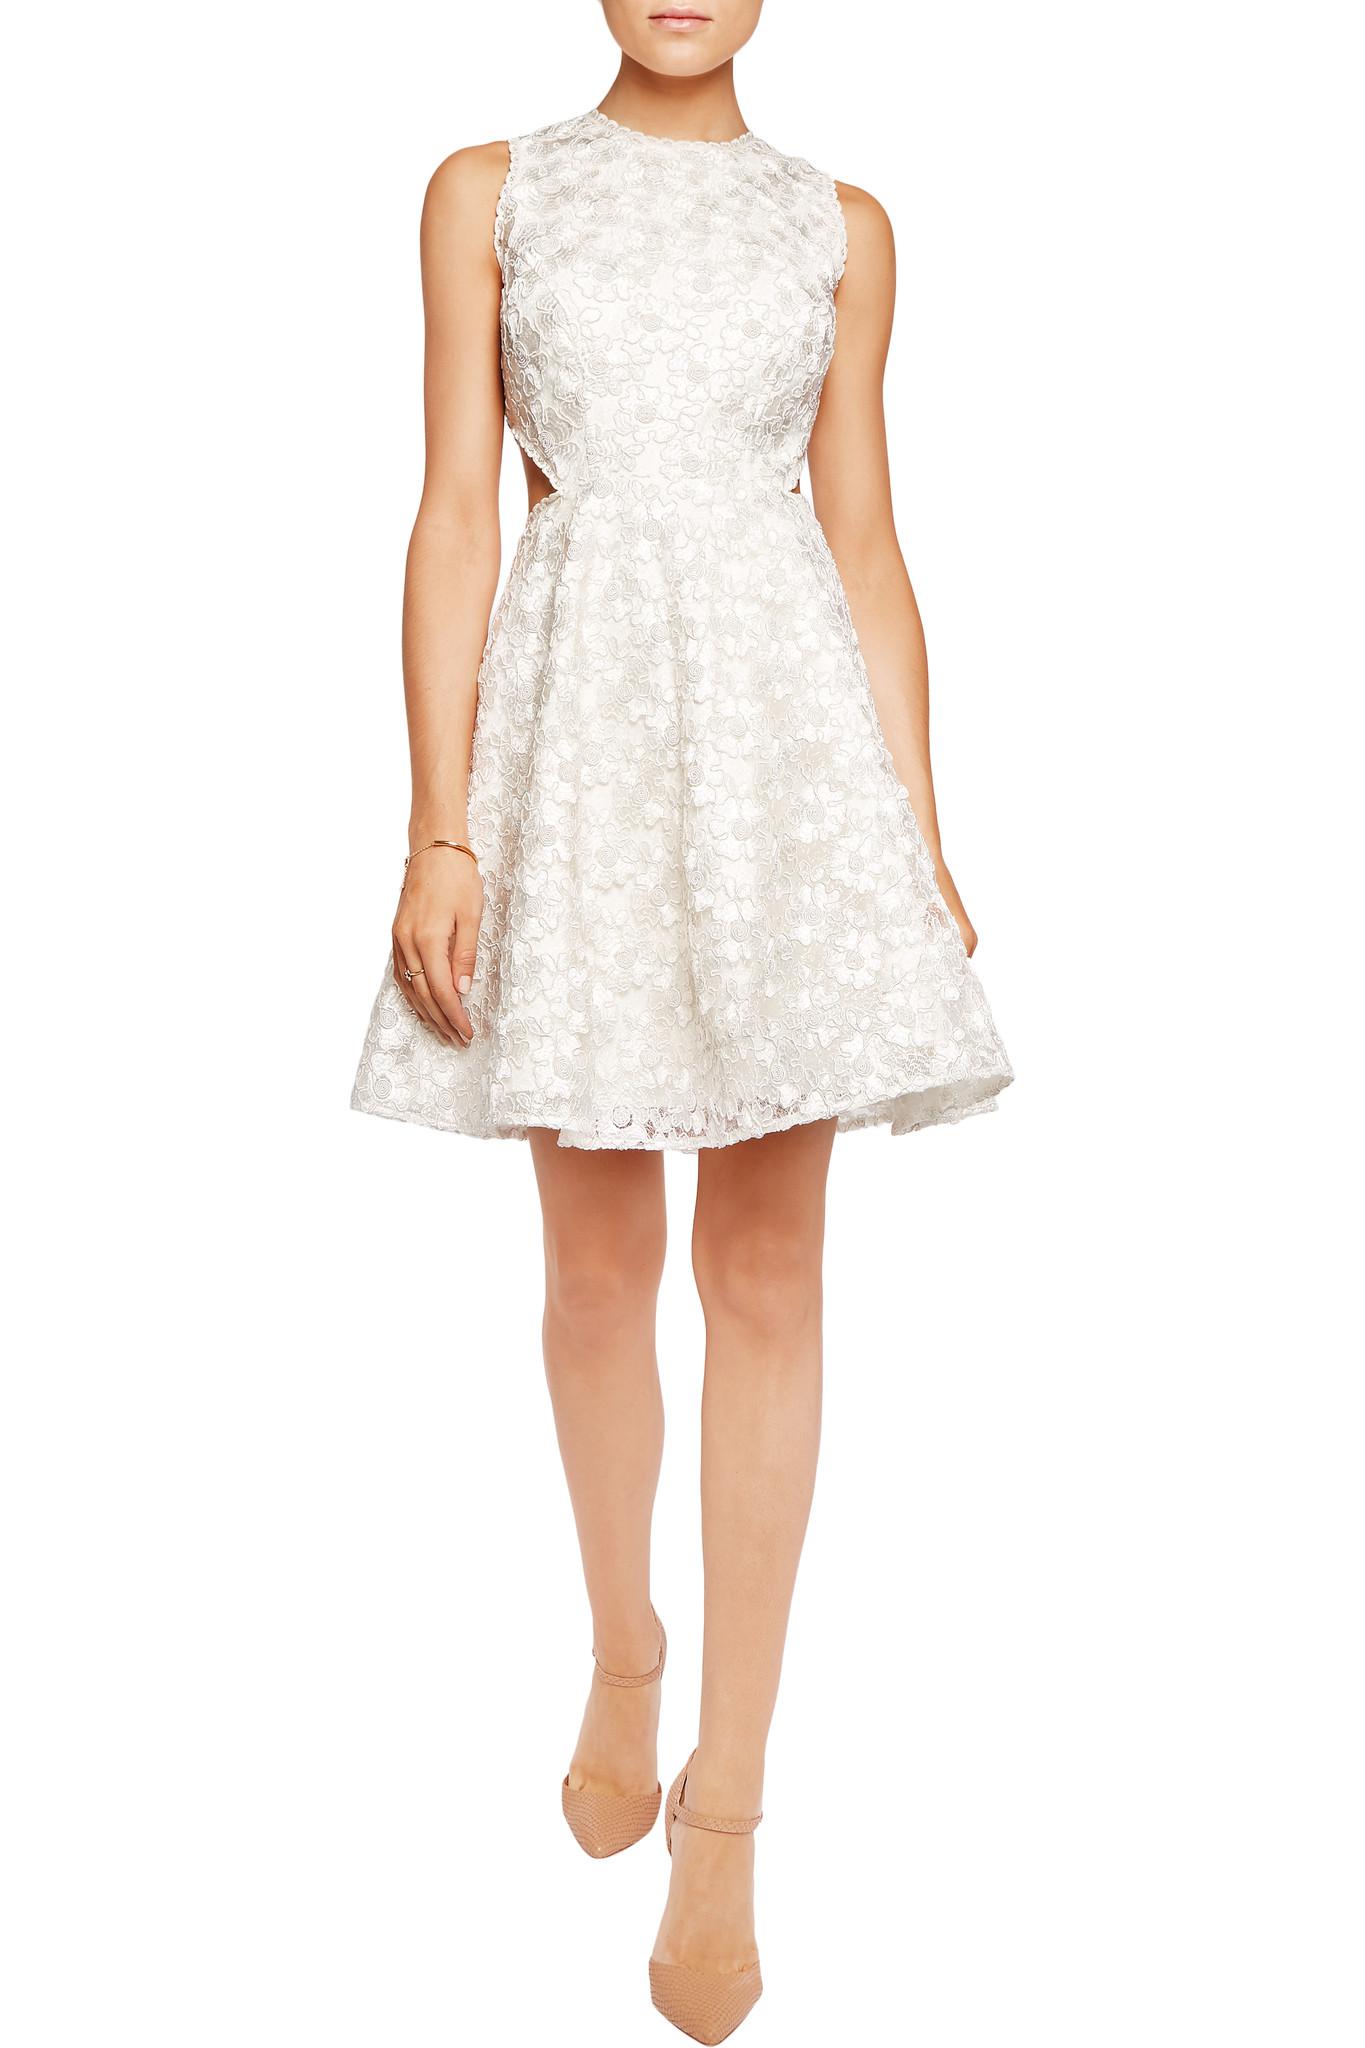 Alexis Dafina Cutout Corded Lace Mini Dress in Ivory (White) - Lyst